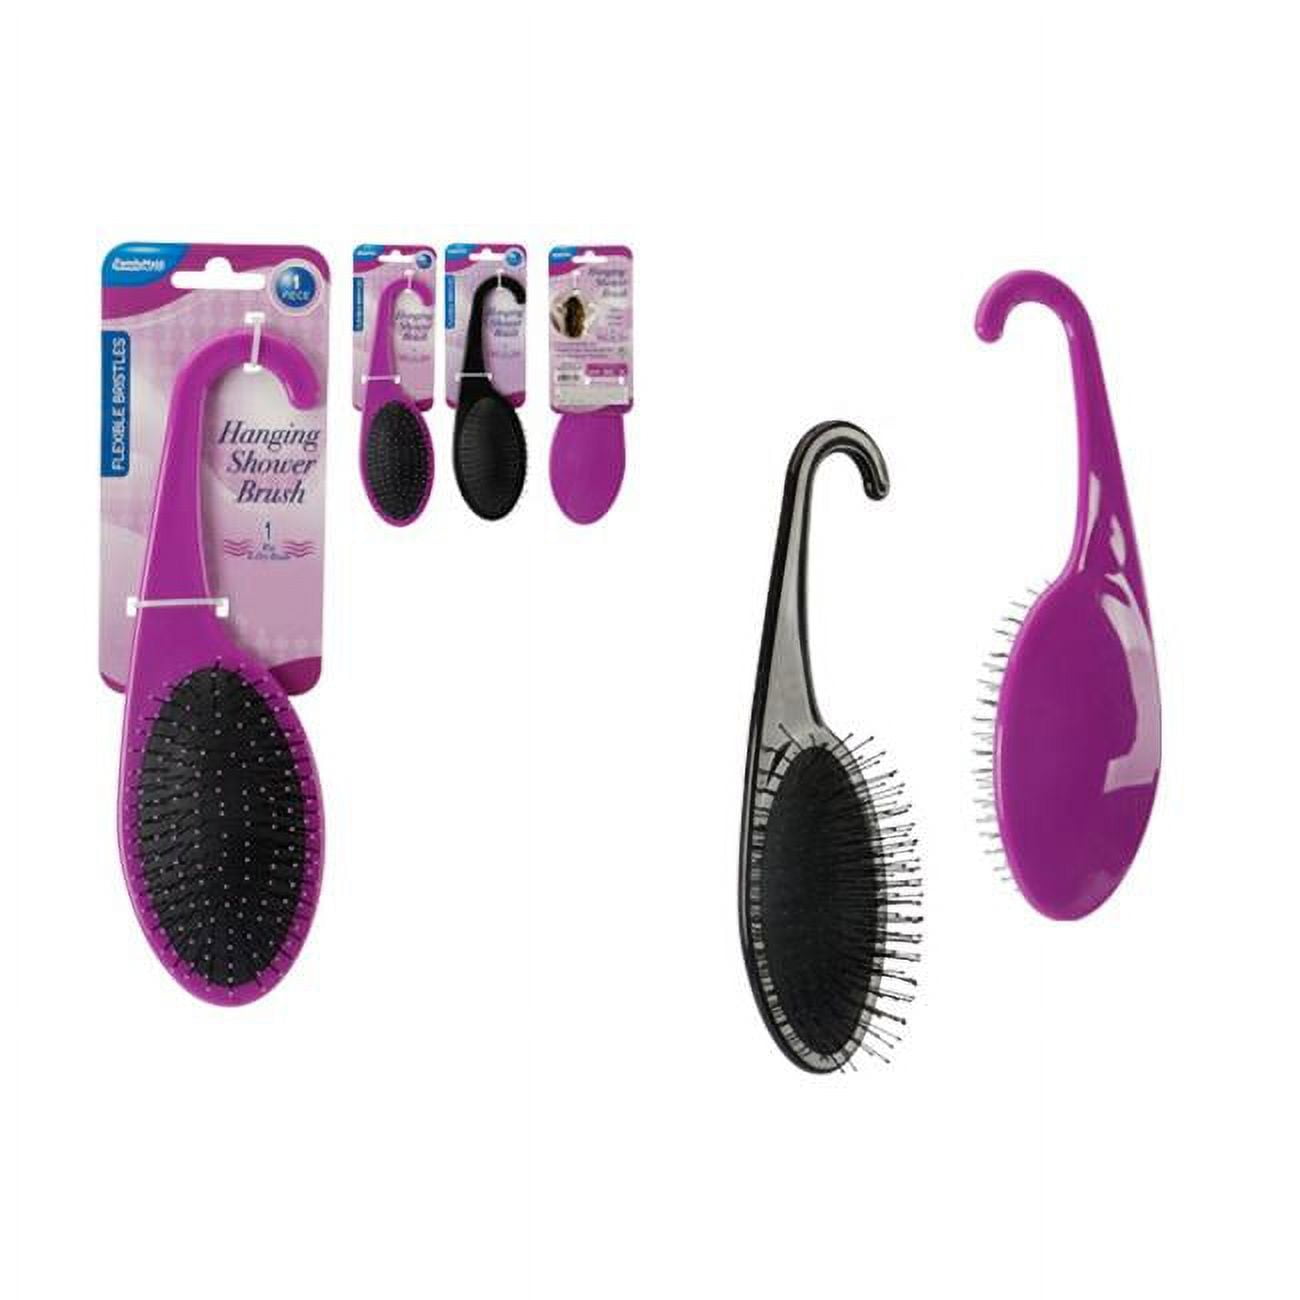 Picture of Familymaid 23440 8.7 in. Hanging Shower Hair Brush